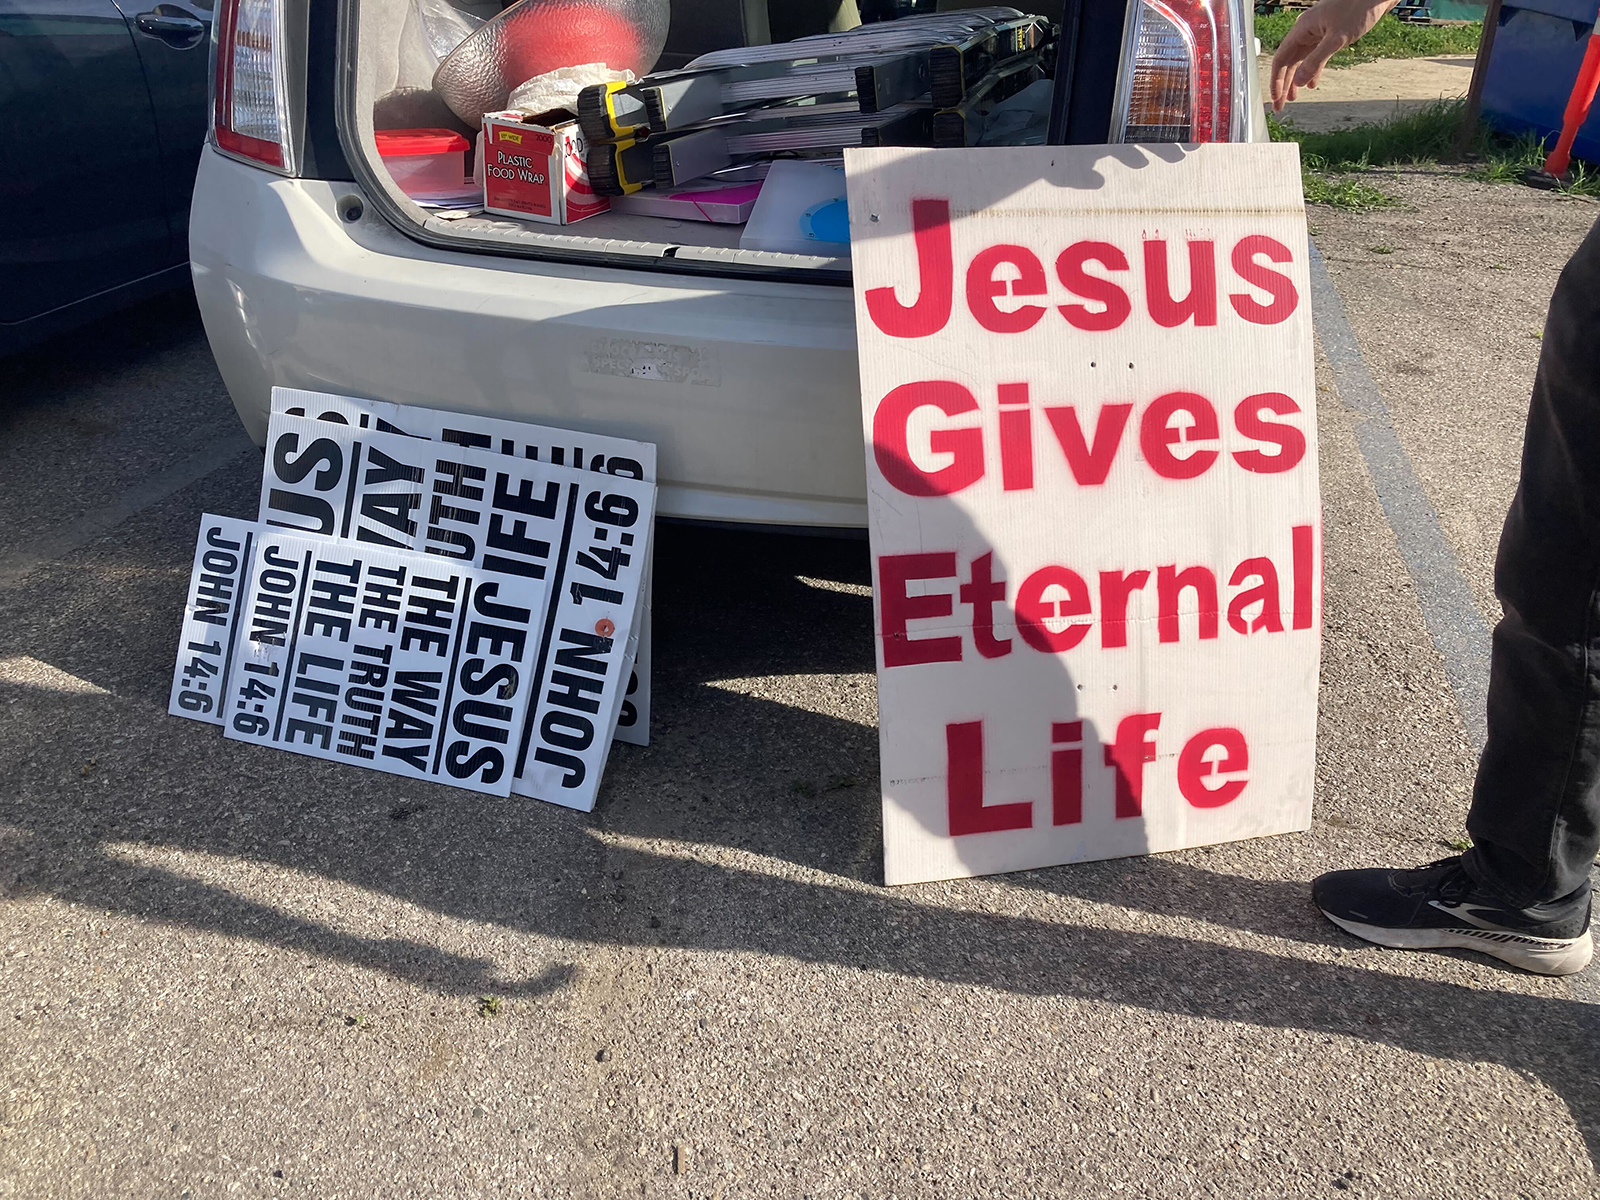 Religious materials illegally placed on public roads are removed by members of Atheists United, Saturday, Feb. 19, 2022, in Los Angeles.  RNS photo by Alejandra Molina